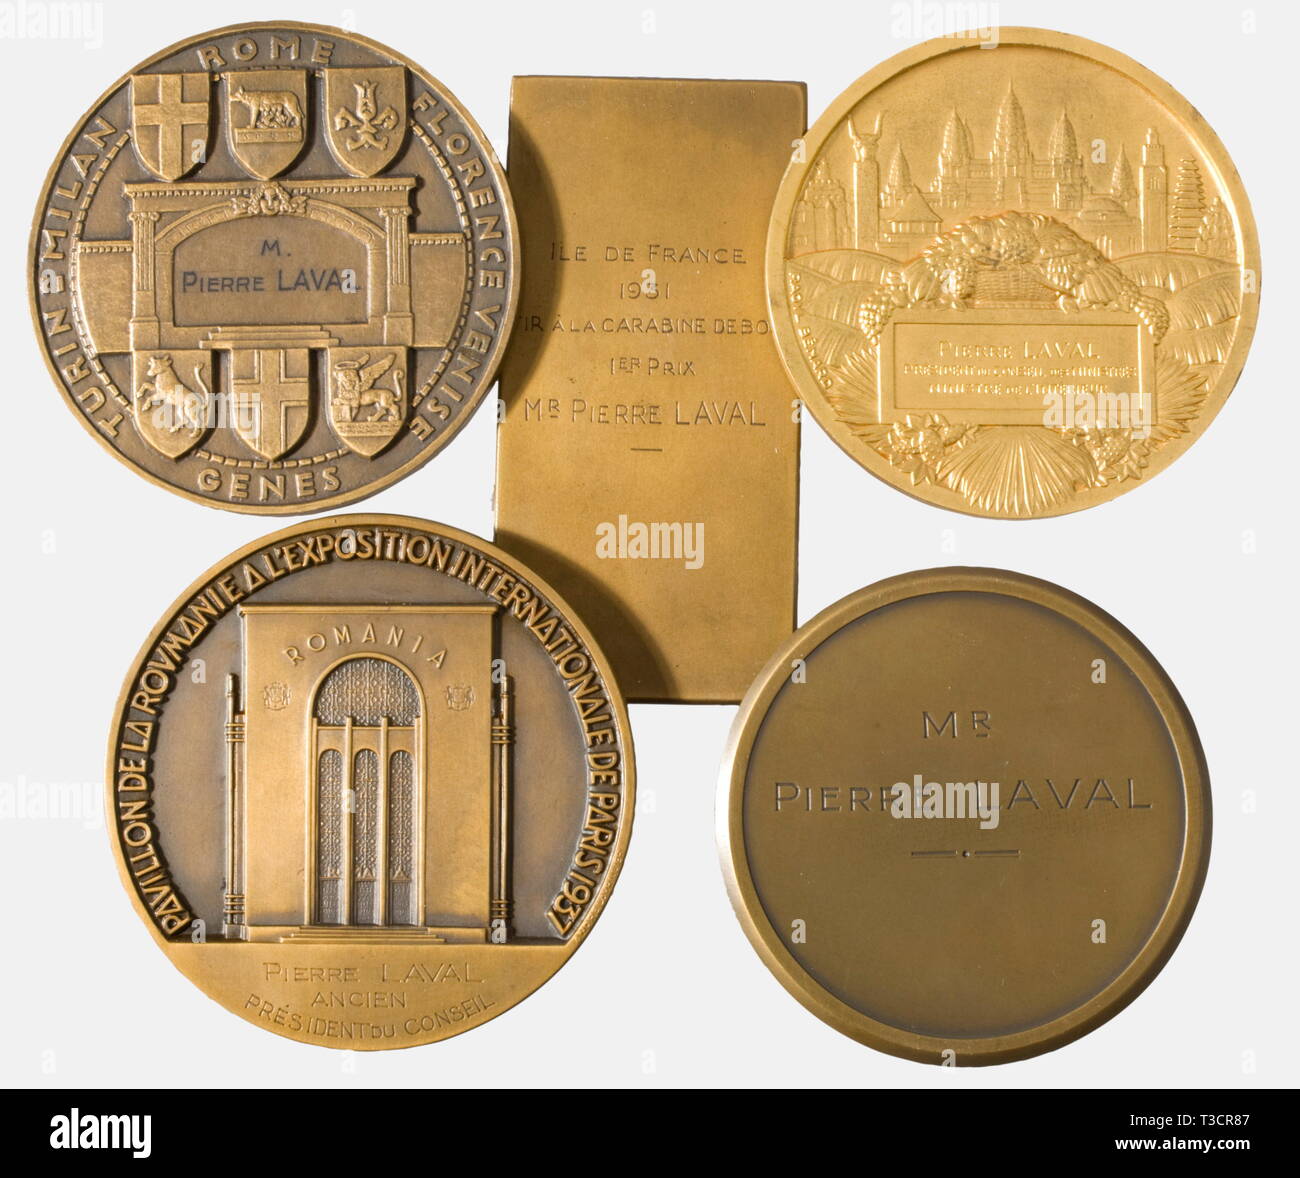 Pierre Laval (1883 - 1945), plaques and medals from his personal possessions Round bronze medallion with Laval's surrounded by the inscription, 'Pierre Laval, Mayor of Aubervilliers. Deputy for Seine,' signed and dated, 'P. Daitel, 15 May 1926'. Diameter 11.9 cm. In a leather case. Bronze presentation medal for the Come historic, historical, 1920s, 1930s, 20th century, 20th century, object, objects, stills, clipping, clippings, cut out, cut-out, cut-outs, No-Exclusive-Use | Editorial-Use-Only Stock Photo